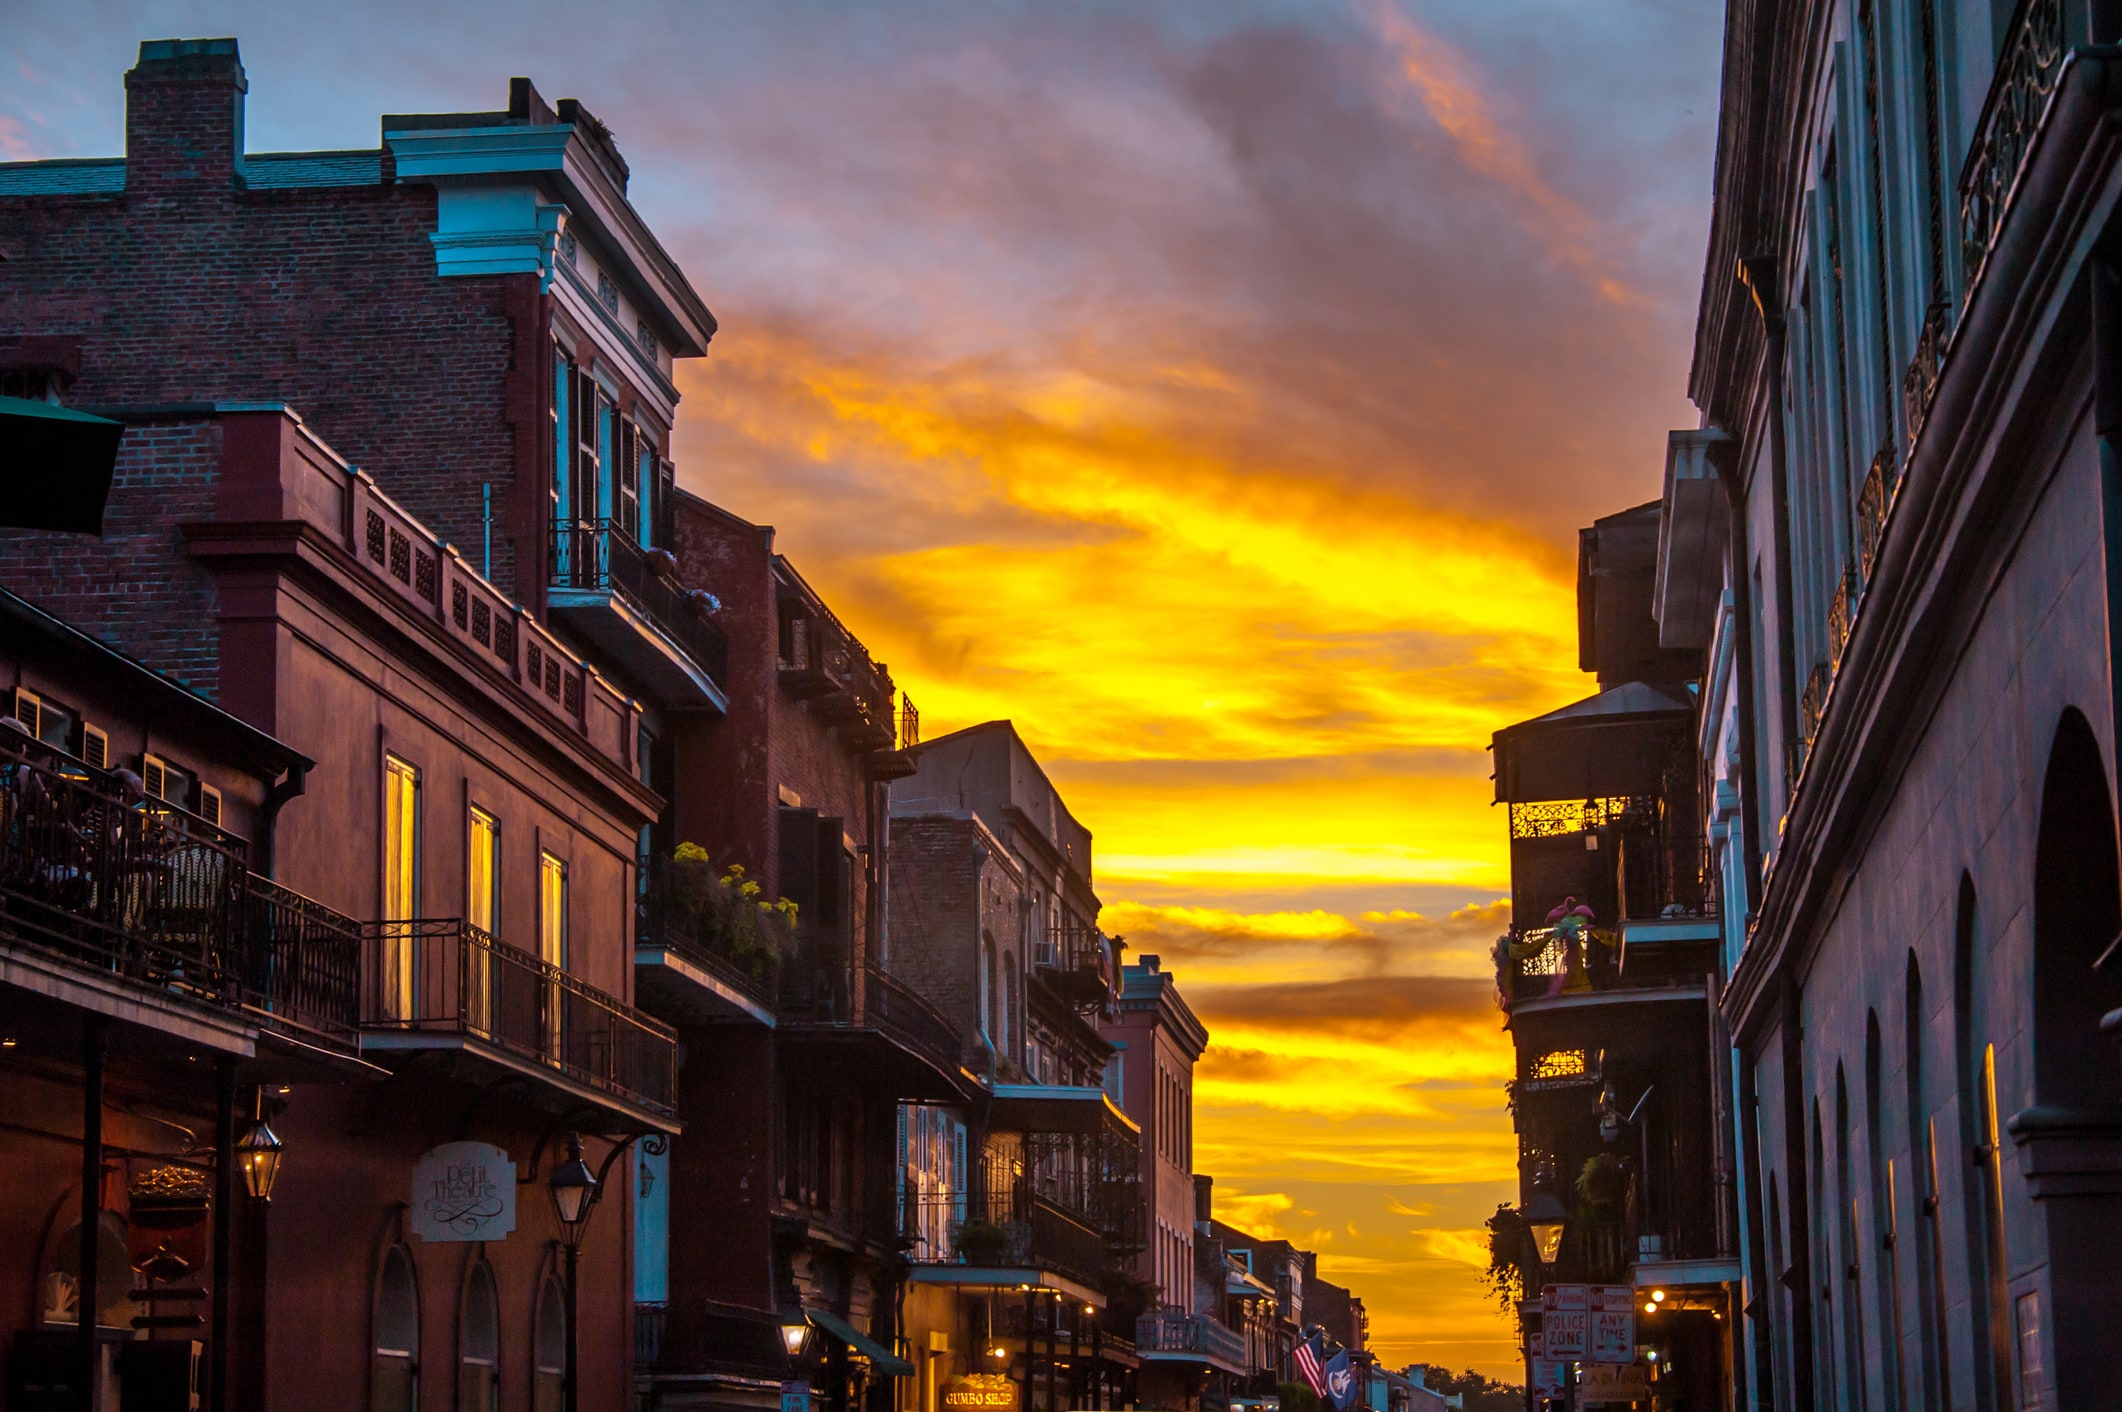 Street view of historic French Quarter of New Orleans